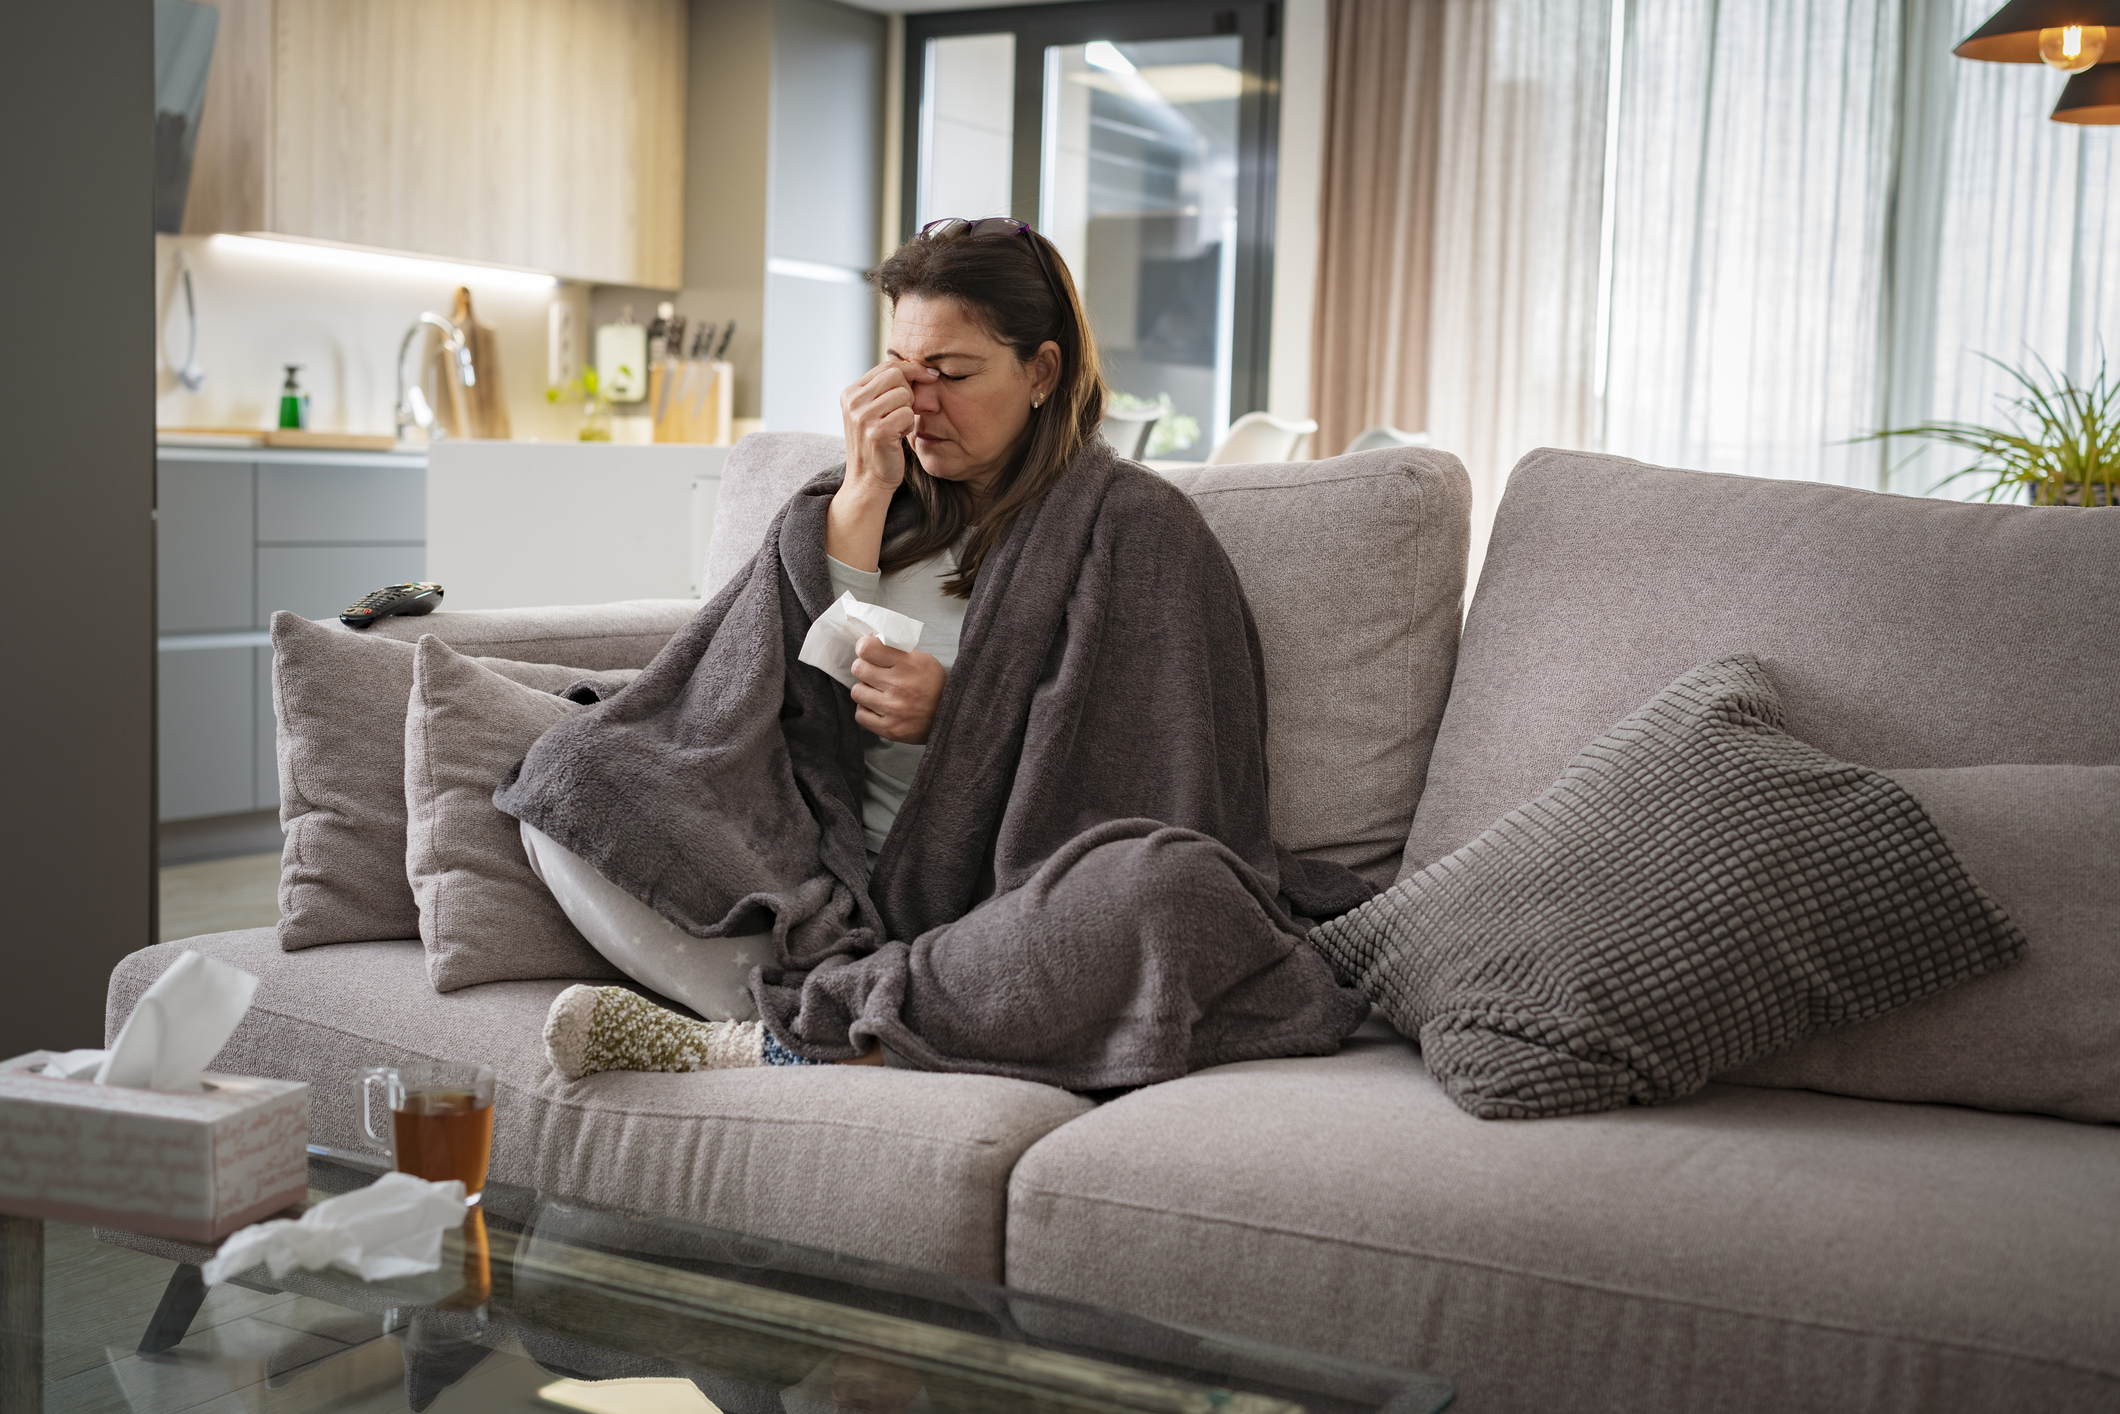 Healthcare and medicine. Woman sick with flu sitting on sofa at home massaging her nose. She is wrapped in blanket. High resolution 42Mp indoors digital capture taken with SONY A7rII and Zeiss Batis 40mm F2.0 CF lens